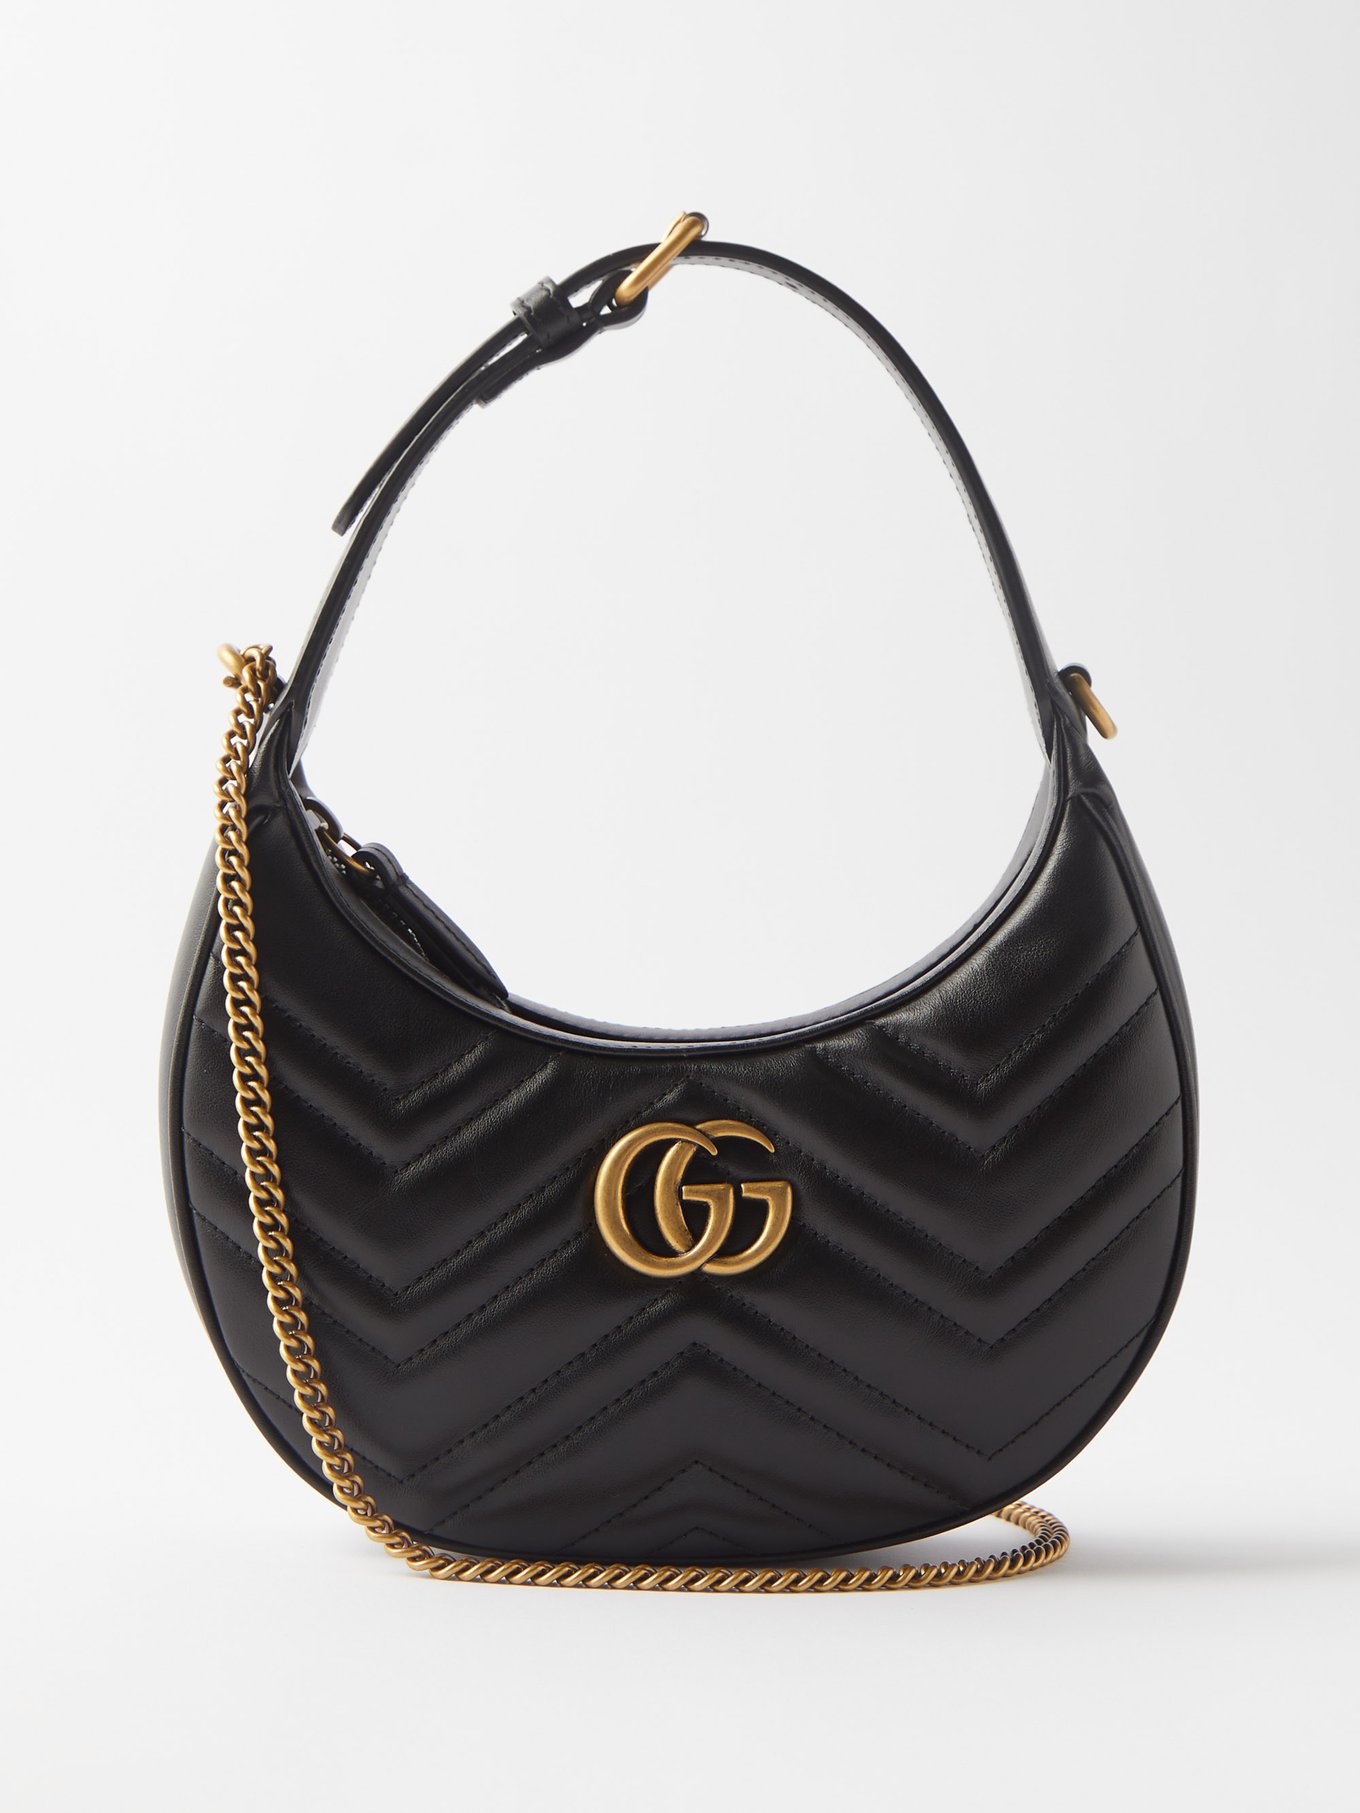 Gucci GG Marmont Canvas Bag  Luxury Fashion Clothing and Accessories